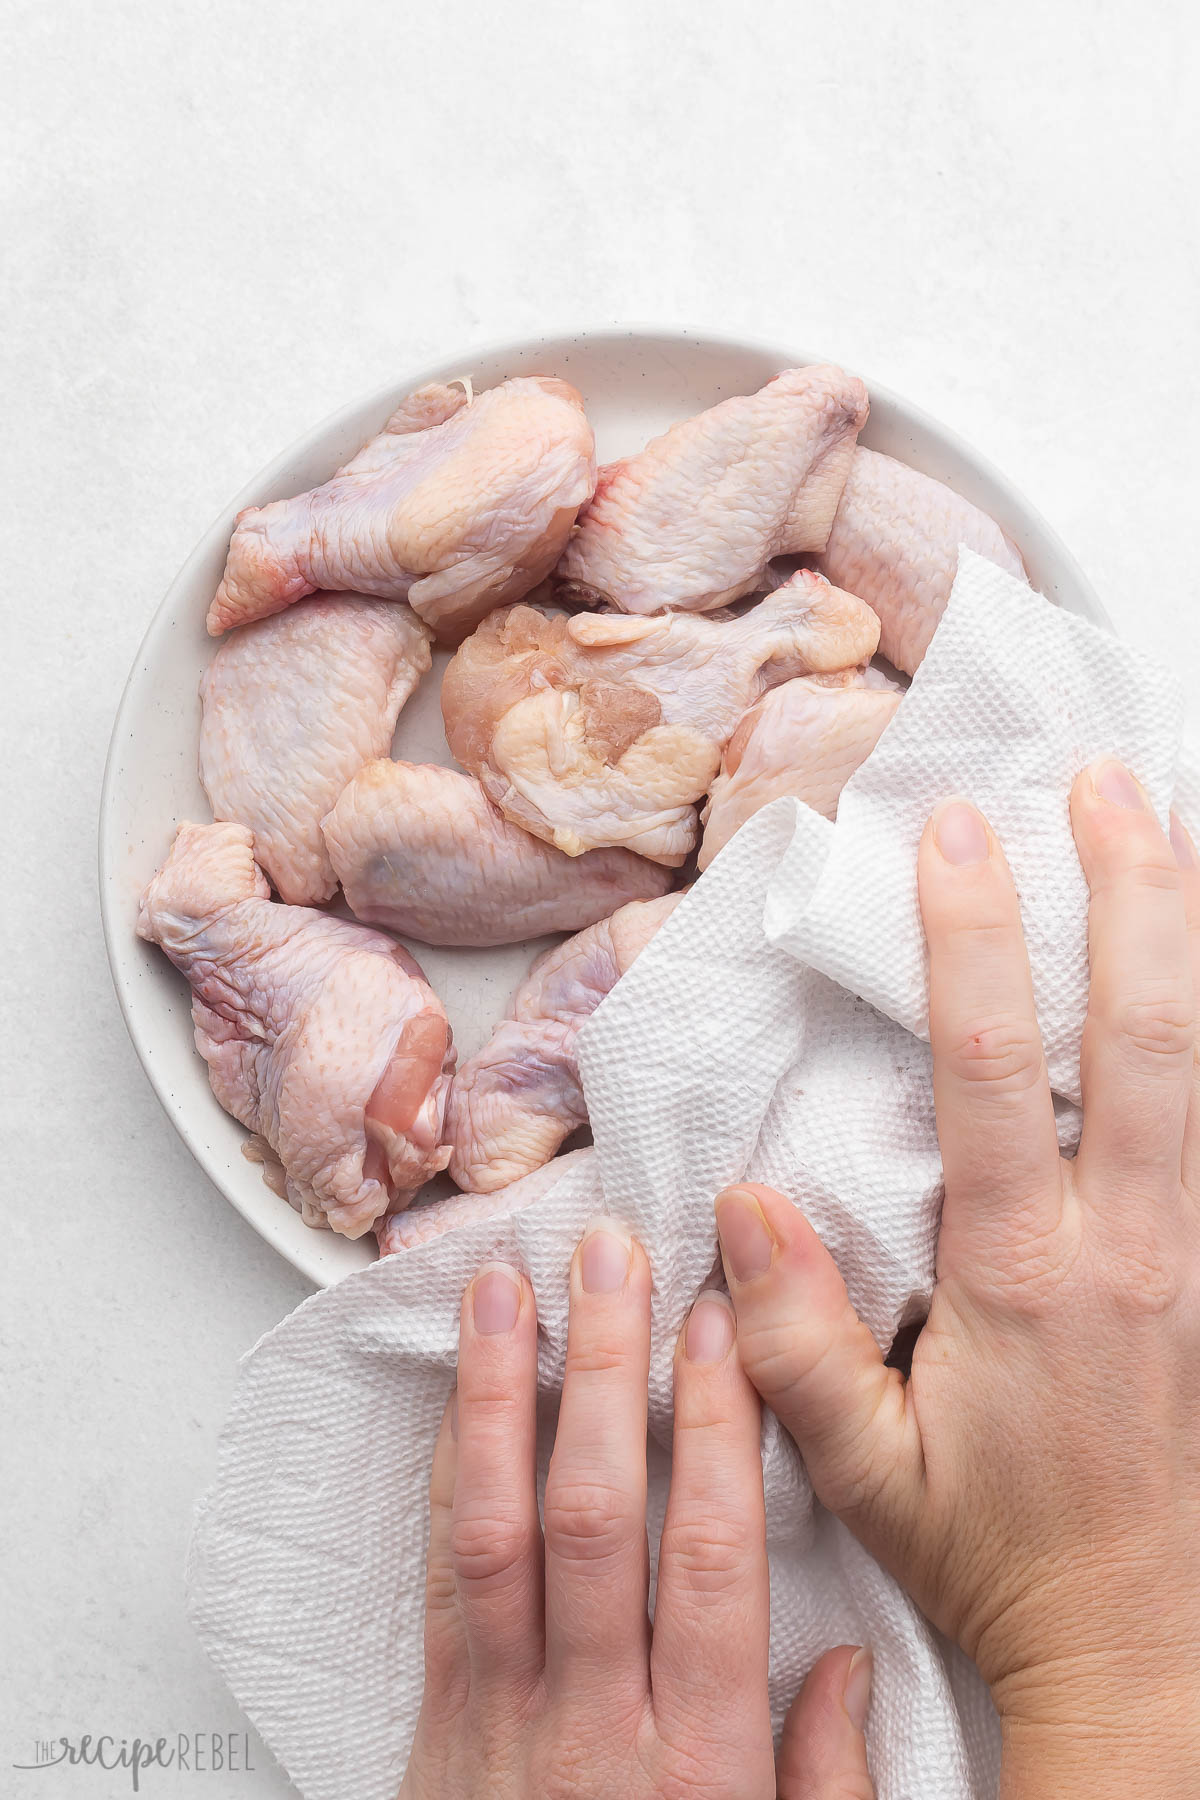 Hands patting down the raw chicken with a paper towel.